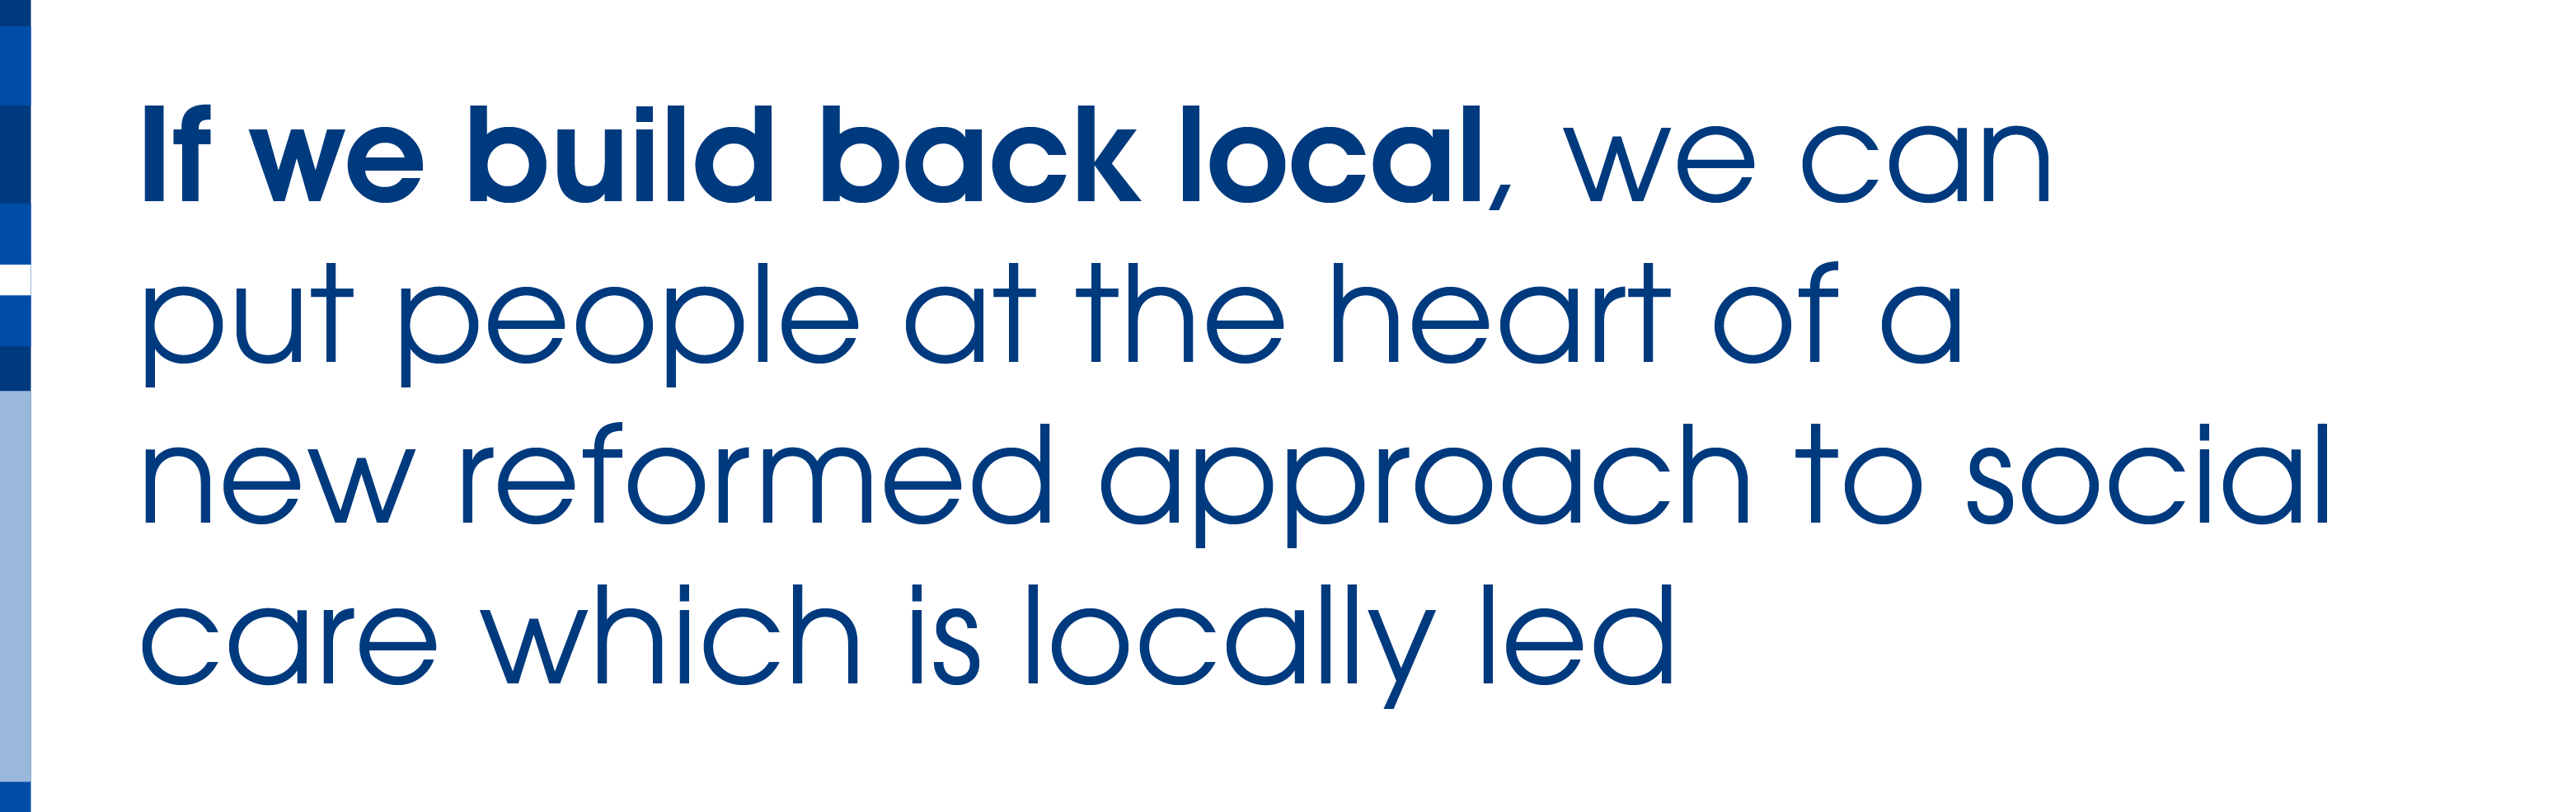 If we build back local, we can put people at the heart of a new reformed approach to social care which is locally led